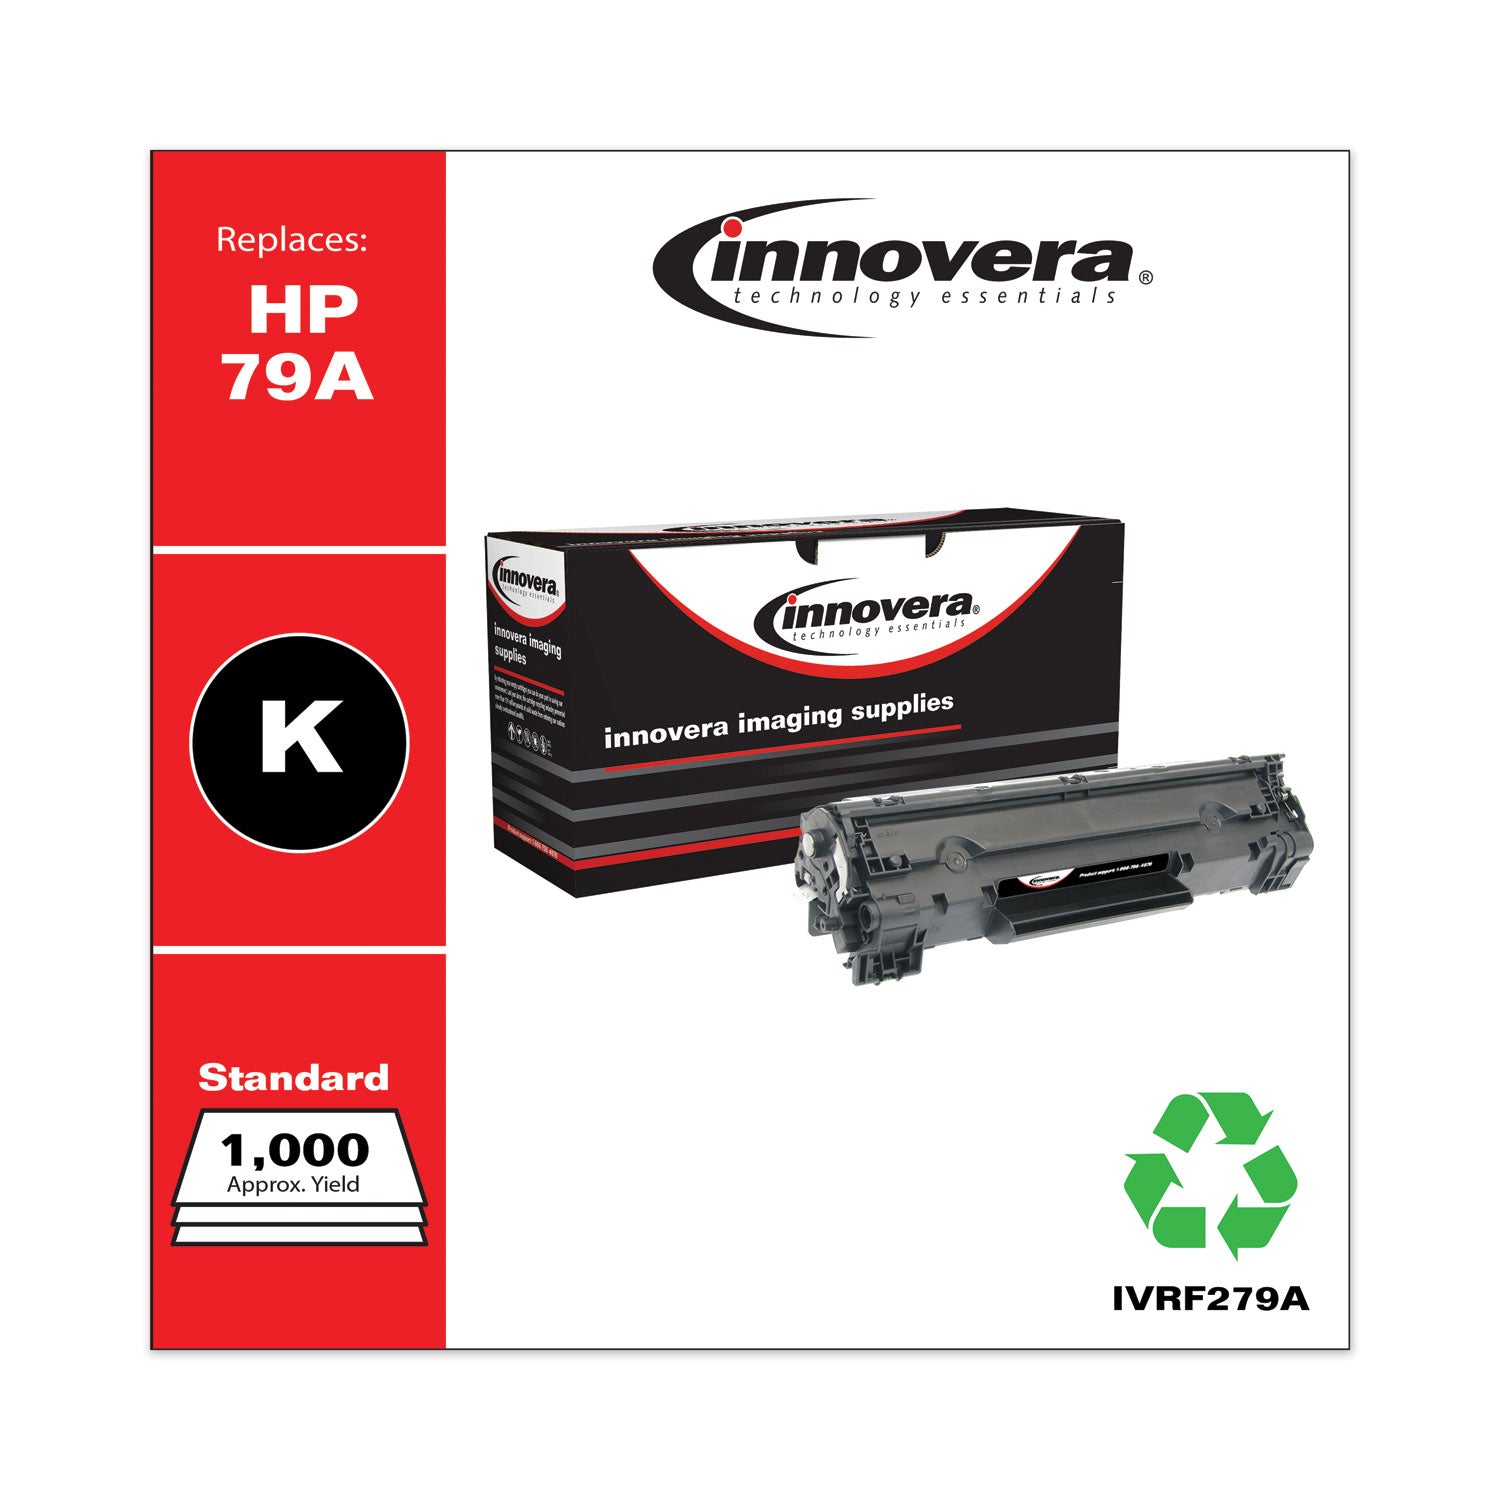 remanufactured-black-toner-replacement-for-78a-cf279a-1000-page-yield-ships-in-1-3-business-days_ivrf279a - 2